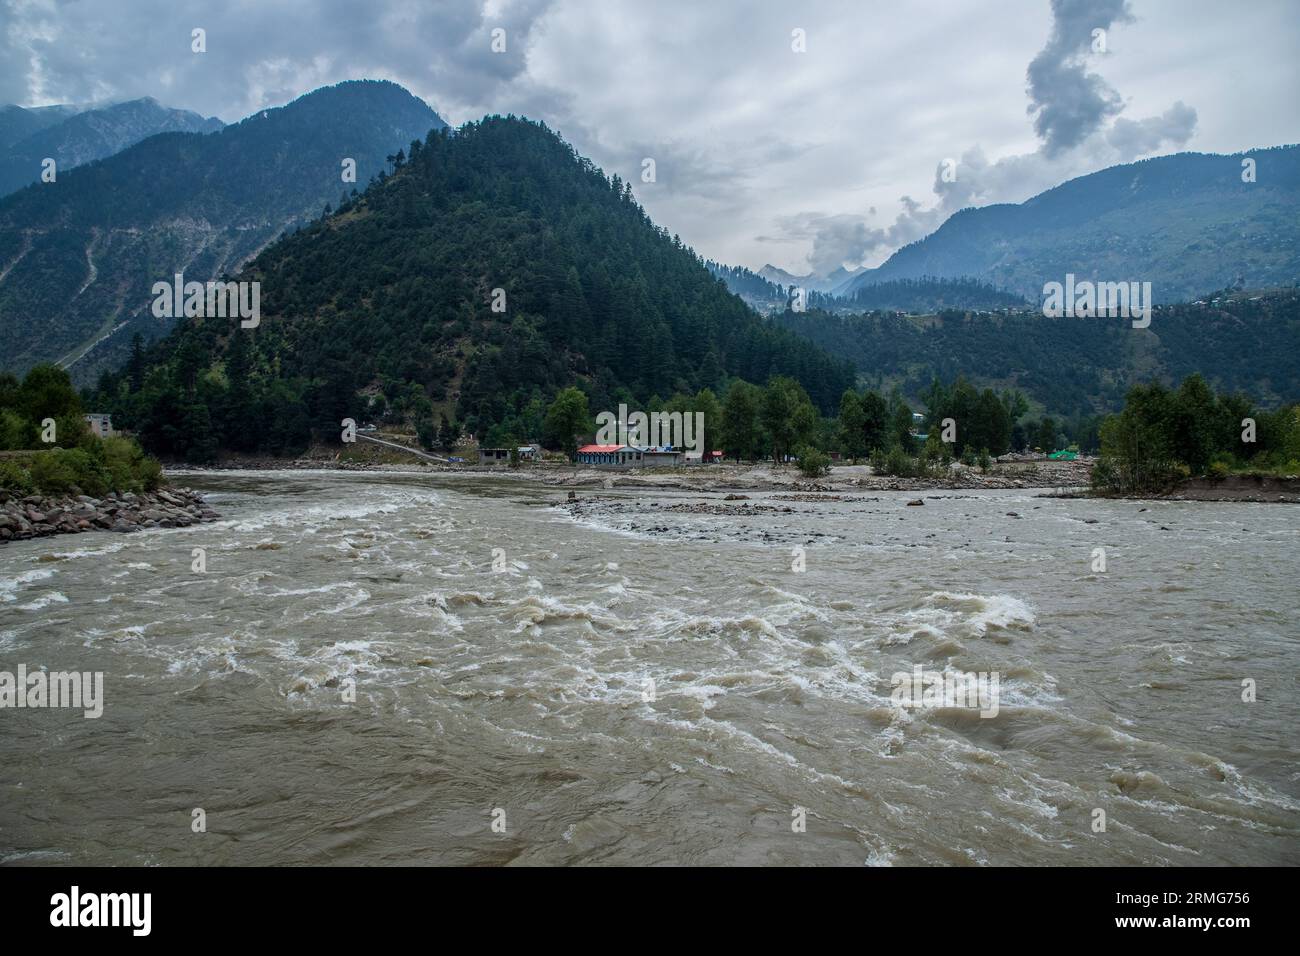 Keran Kupwara, India. 25th Aug, 2023. General view of Neelam river or Kishan Ganga that has divided Kashmir into two parts controlled by nuclear rivals India and Pakistan. The river acts as a disputed line of control and flows through a village called Keran from both sides which is located on the northern side of Indian Kashmir's Border district Kupwara some 150kms from Srinagar and 93kms from Muzaffarabad, in the Pakistan side of Kashmir. (Photo by Faisal Bashir/SOPA Images/Sipa USA) Credit: Sipa USA/Alamy Live News Stock Photo